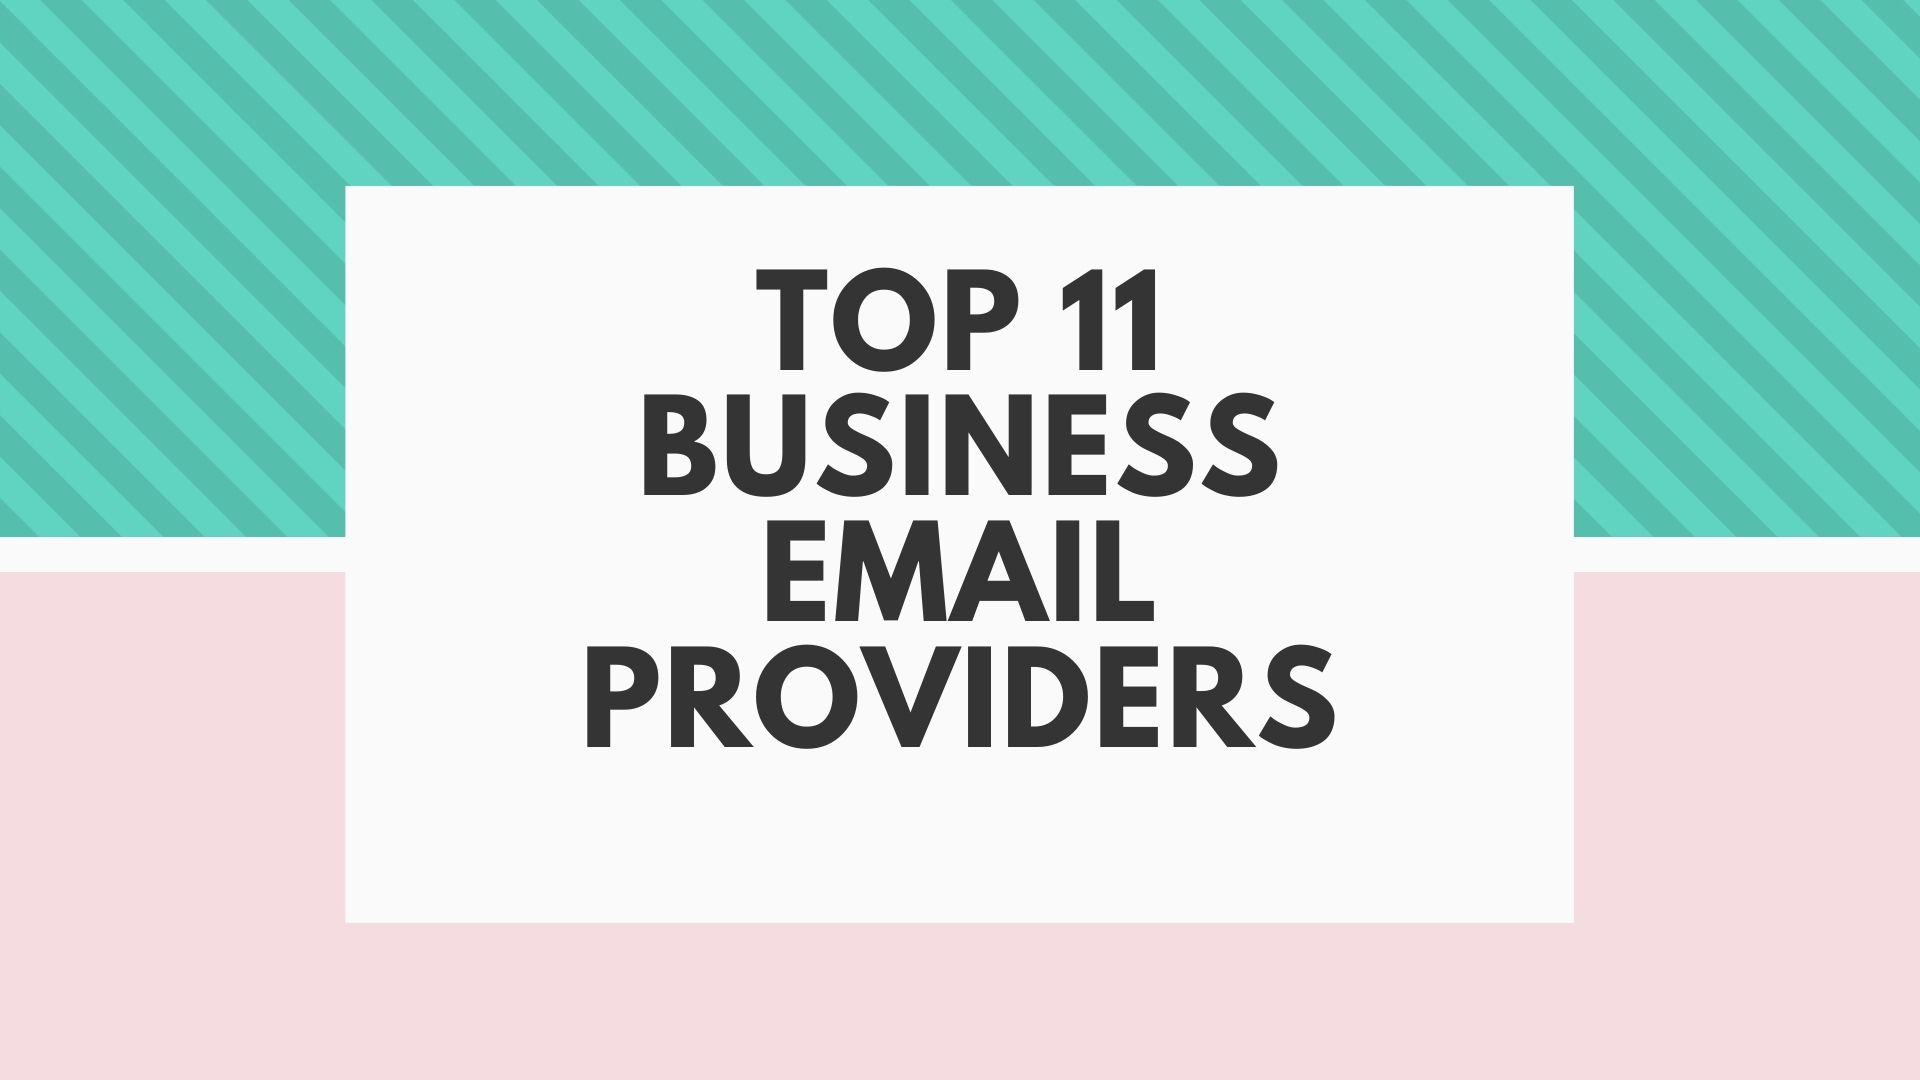 Top 11 business email providers